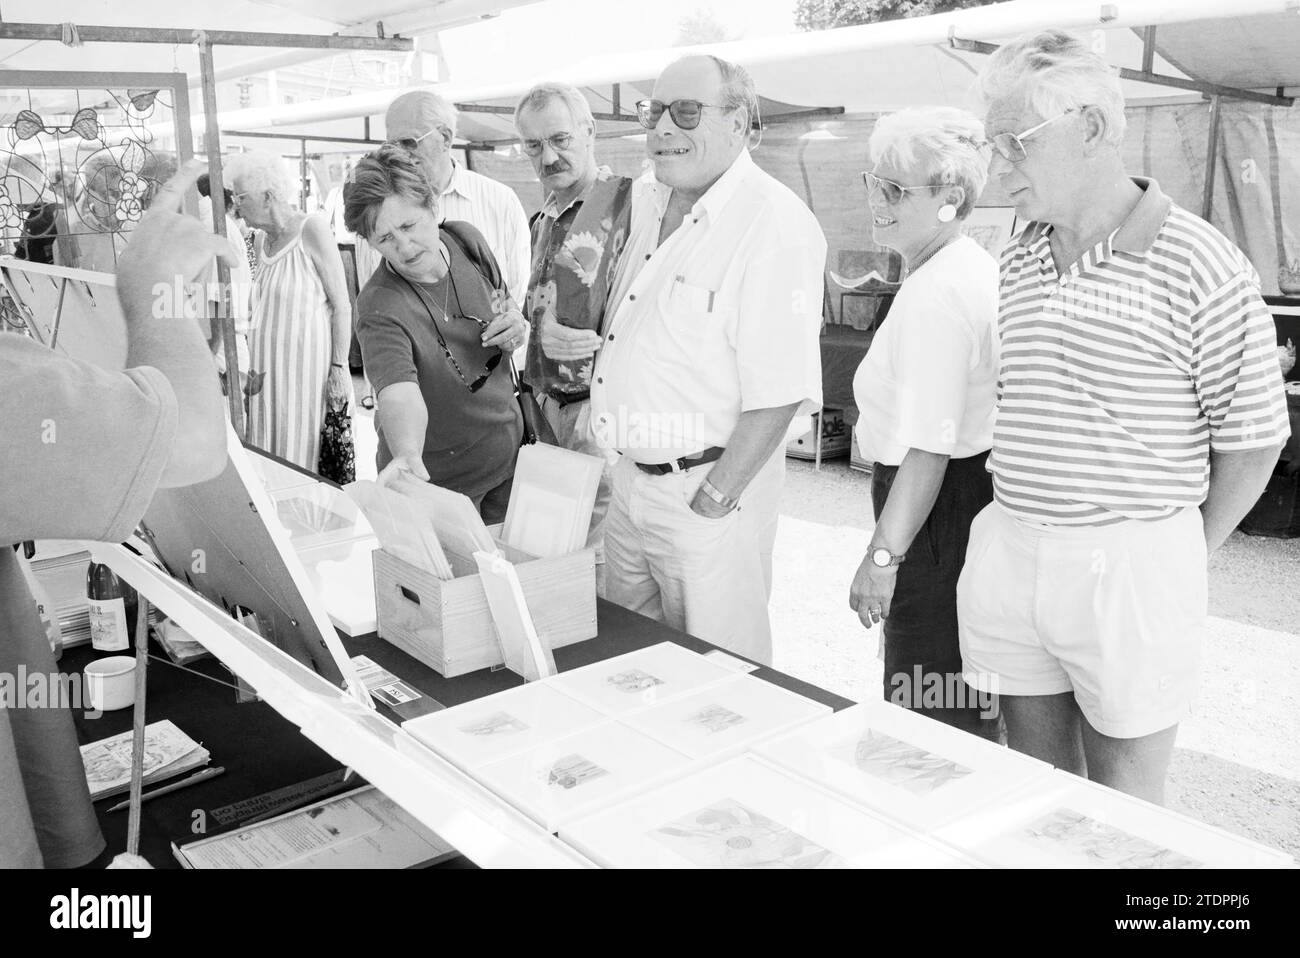 Art market Spaarndam, Spaarndam, 22-07-1994, Whizgle News from the Past, Tailored for the Future. Explore historical narratives, Dutch The Netherlands agency image with a modern perspective, bridging the gap between yesterday's events and tomorrow's insights. A timeless journey shaping the stories that shape our future Stock Photo